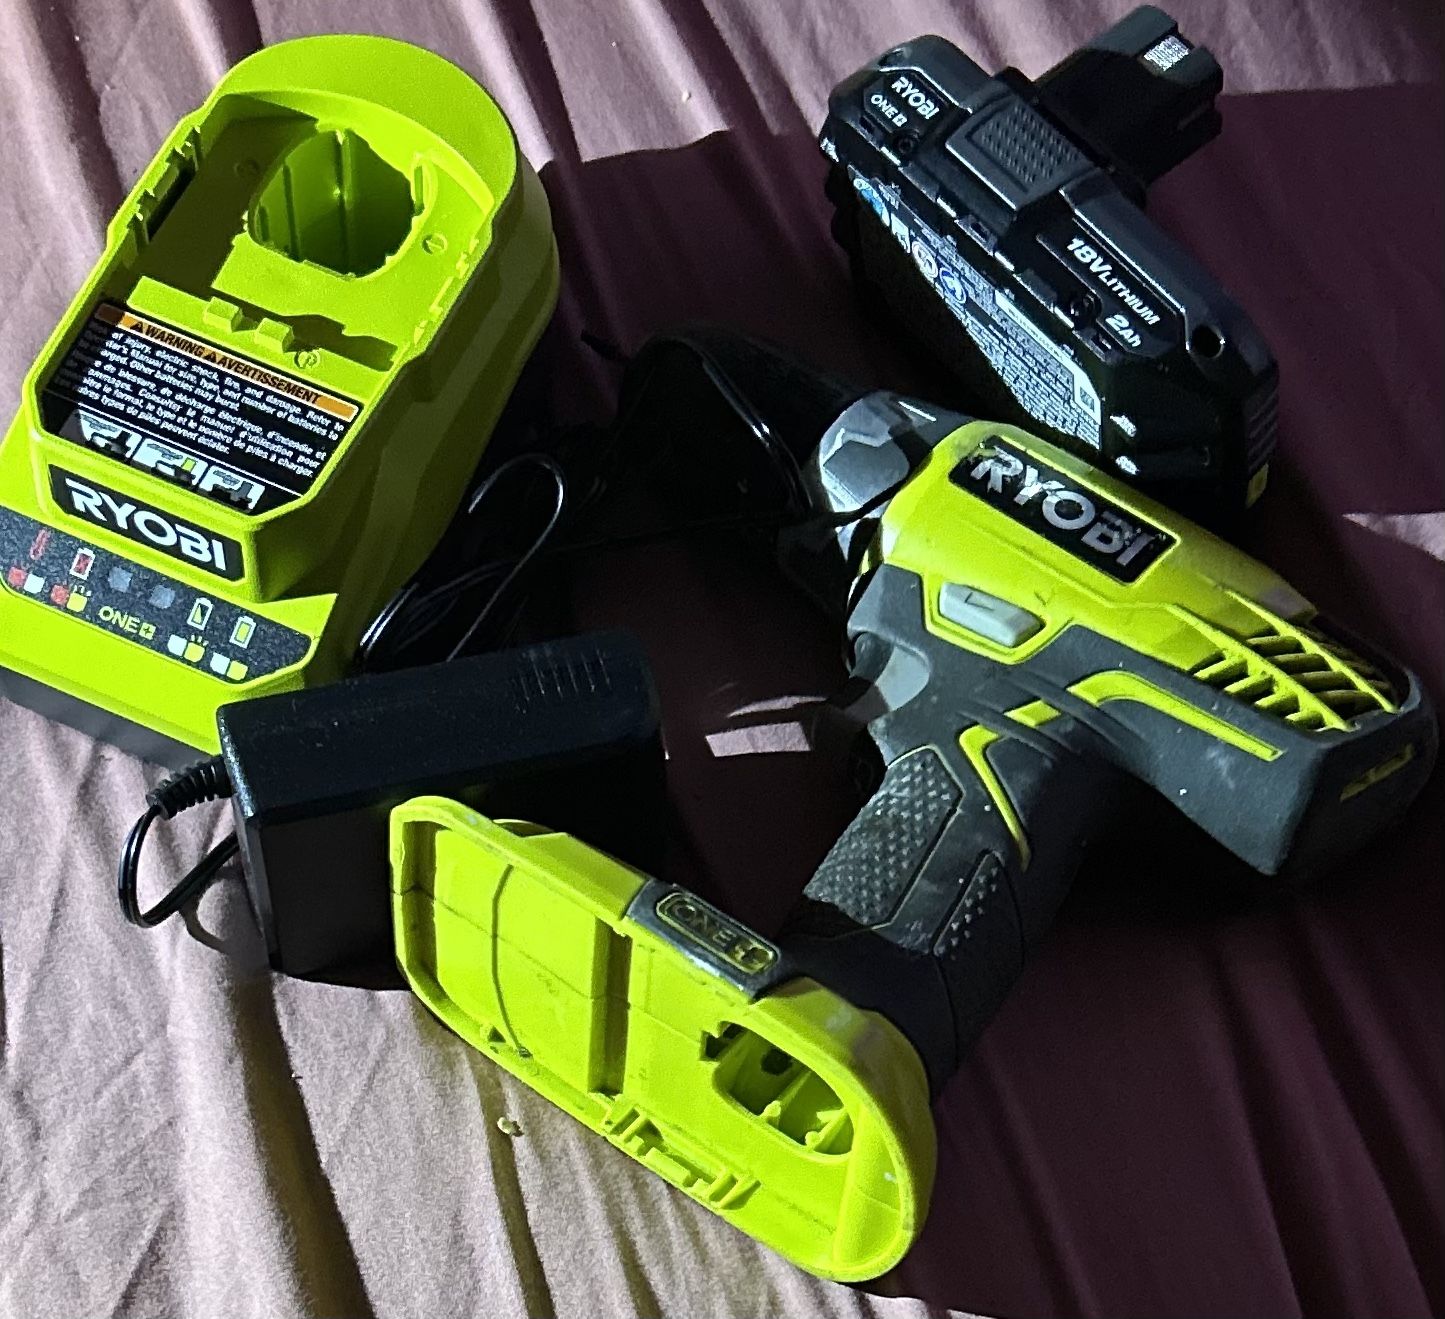 Ryobi Drill, Battery And Charger